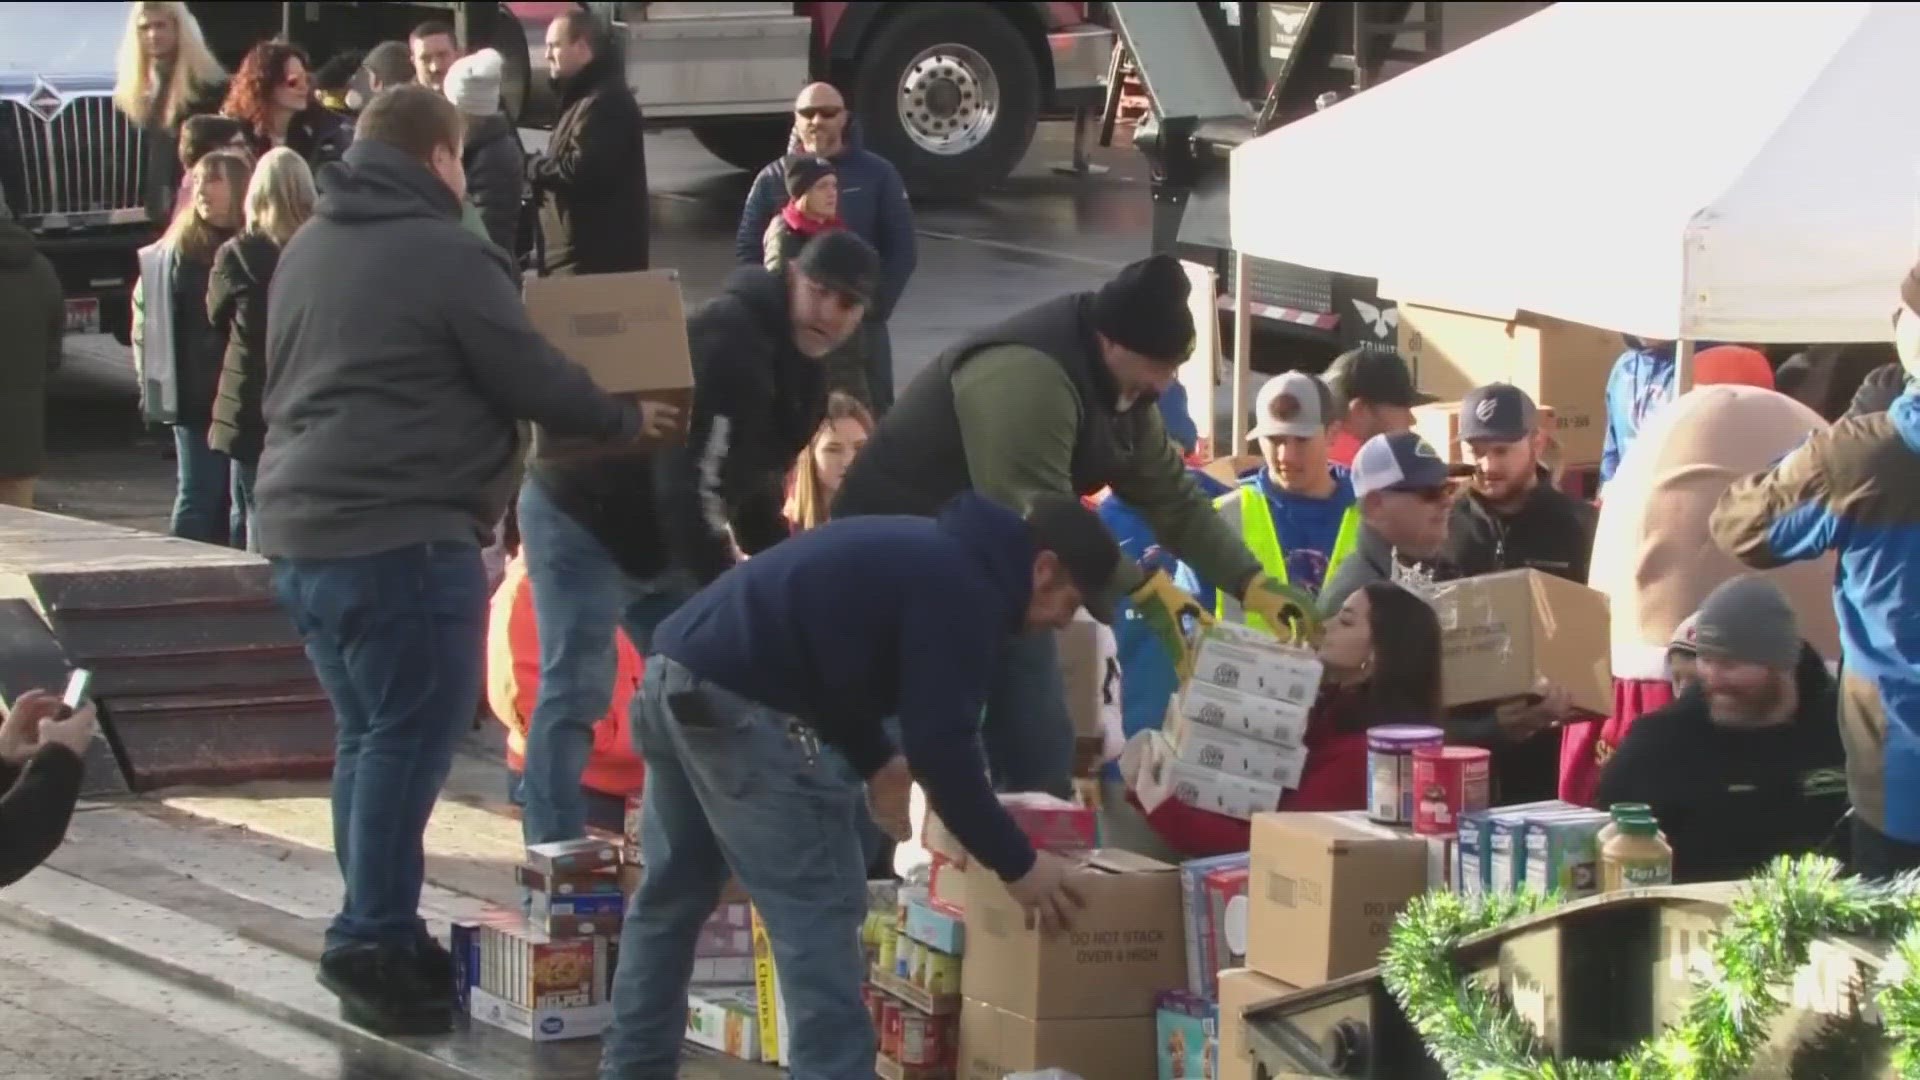 For KTVB's 16th annual 7Cares Idaho Shares campaign, Valley Wide Cooperative is showing support for Idahoans in need as a featured Company that Cares.